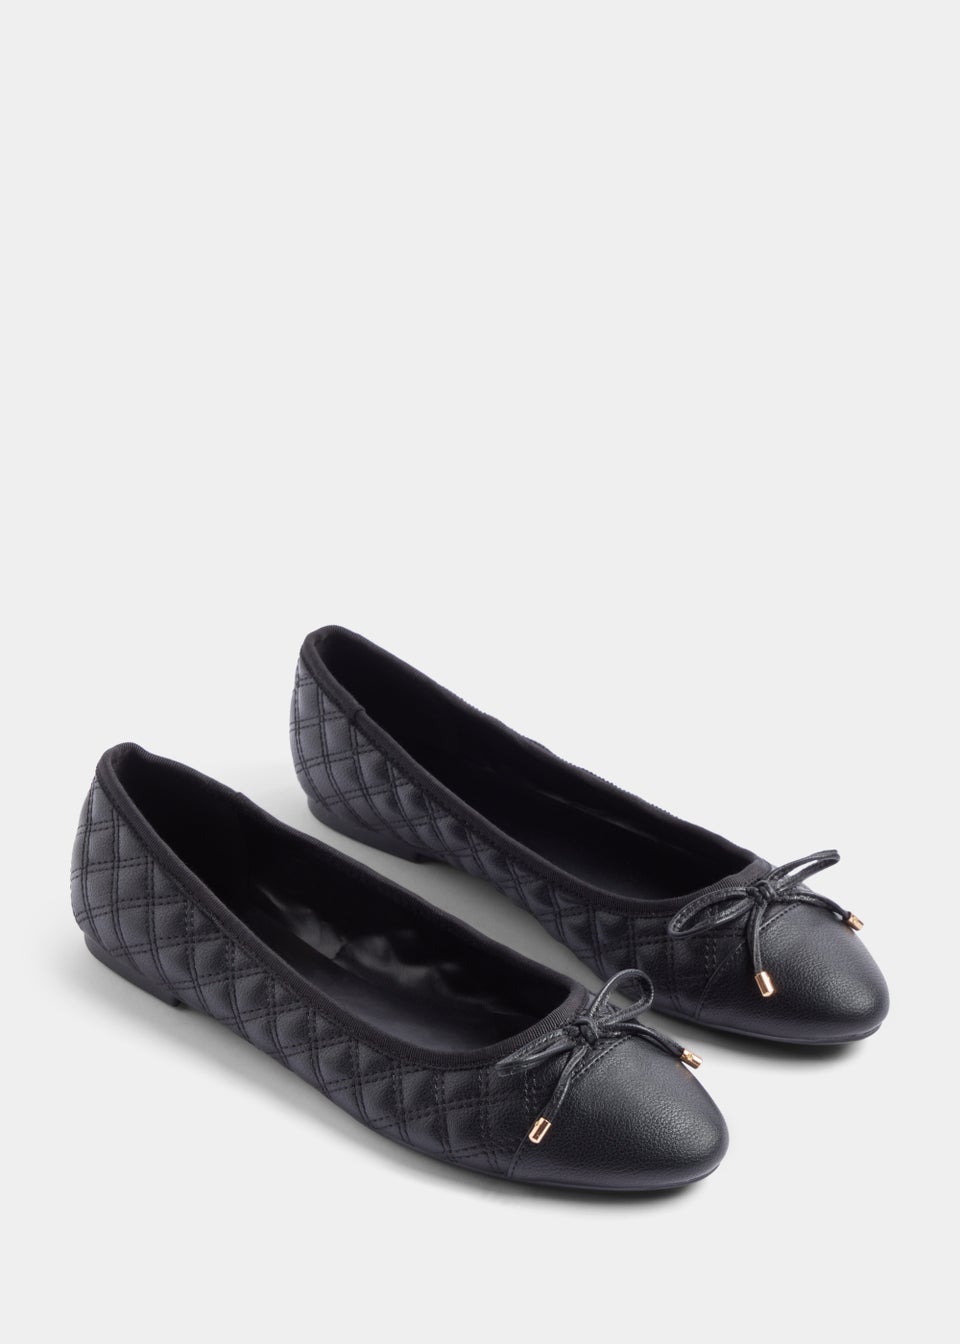 Black Quilted Ballet Shoes